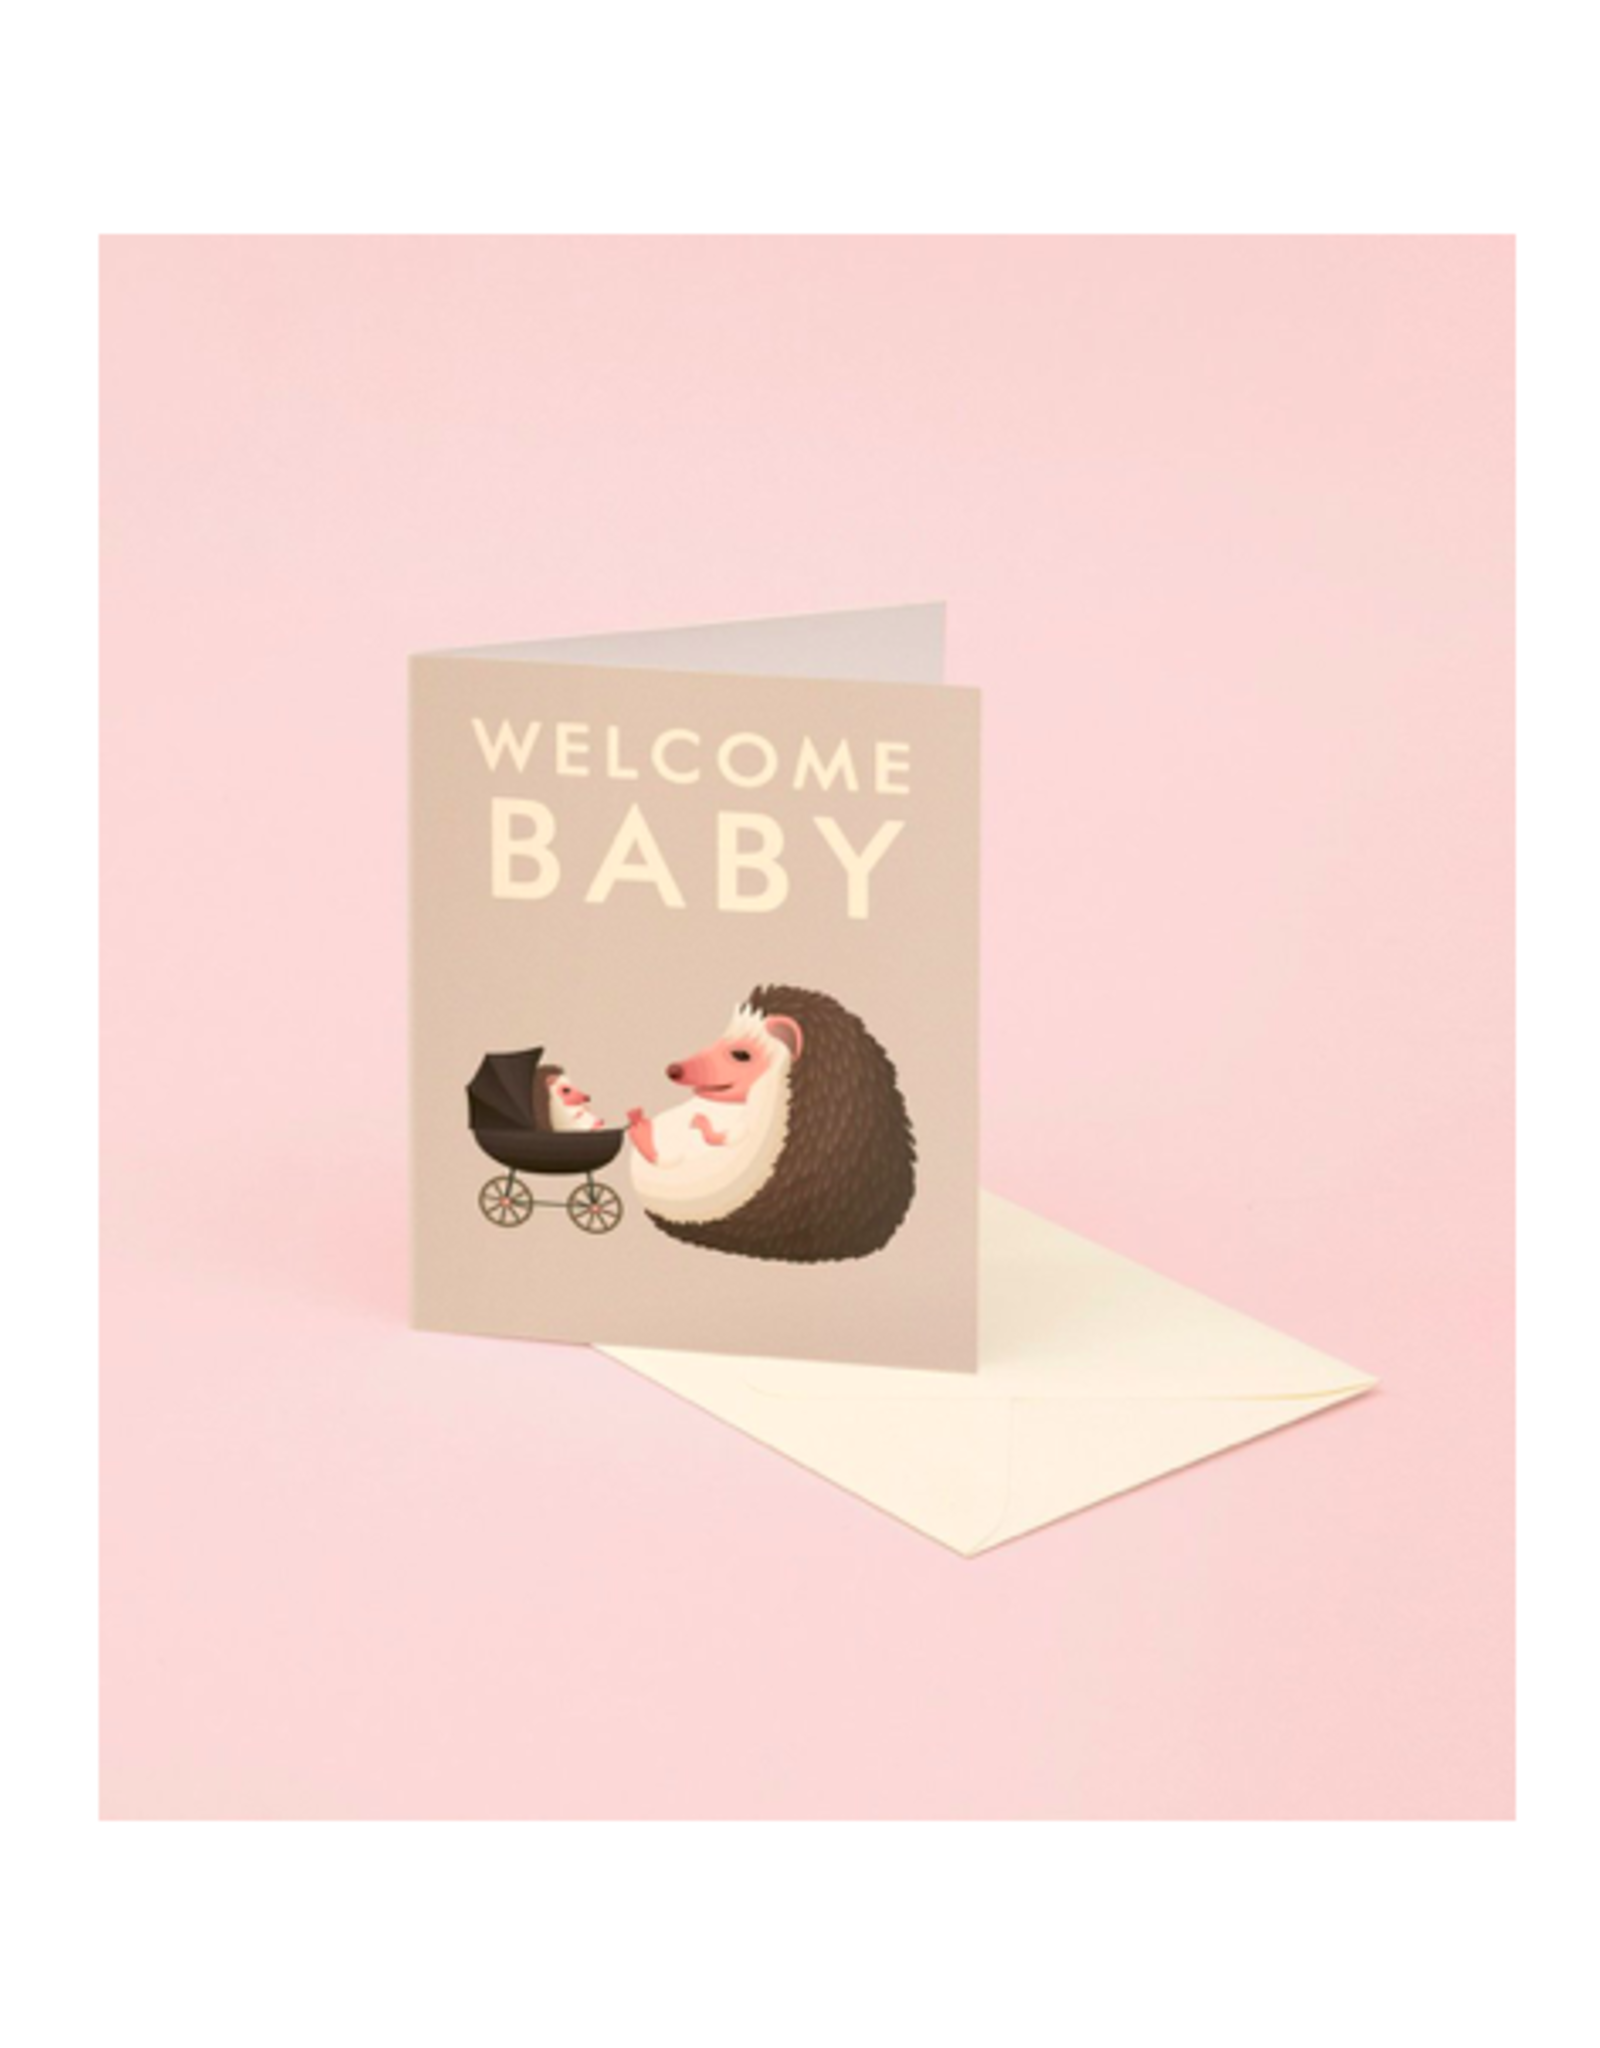 CAP - Card / Welcome Baby, 4.25 x 5.5"